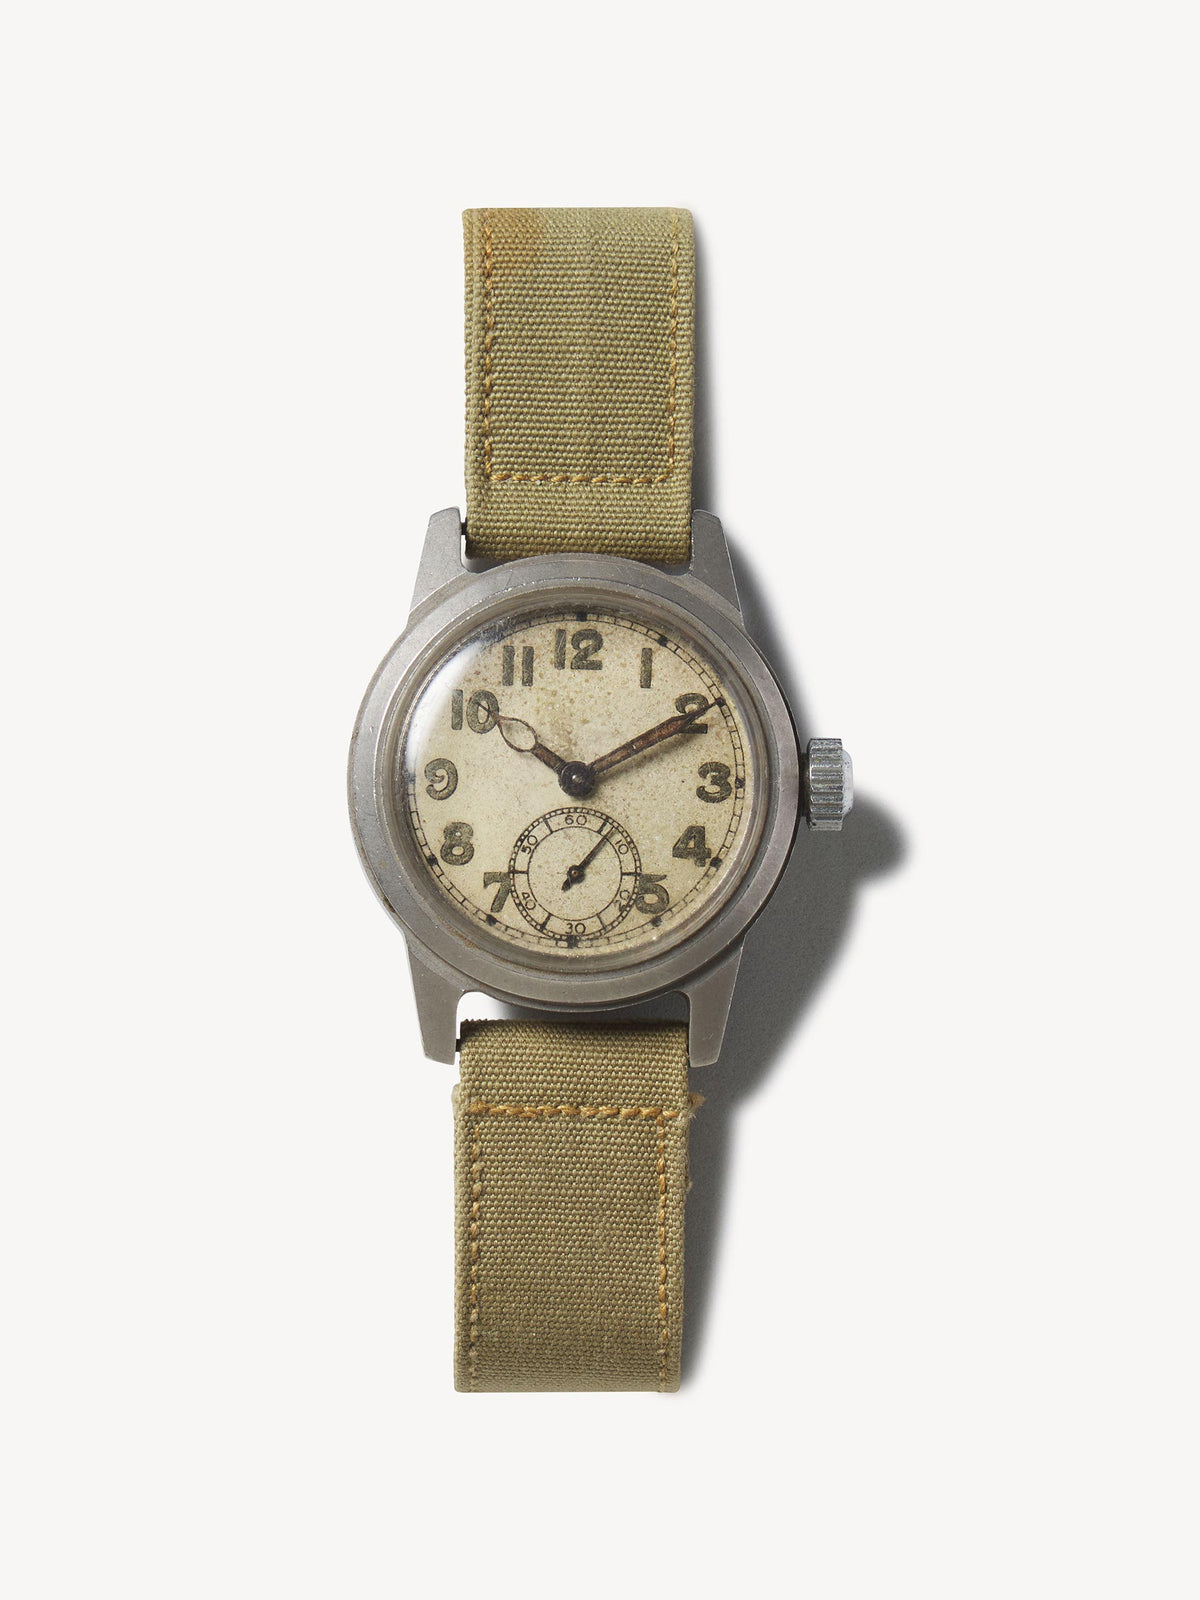 Military Captains Watch - 0270 - Product Flat